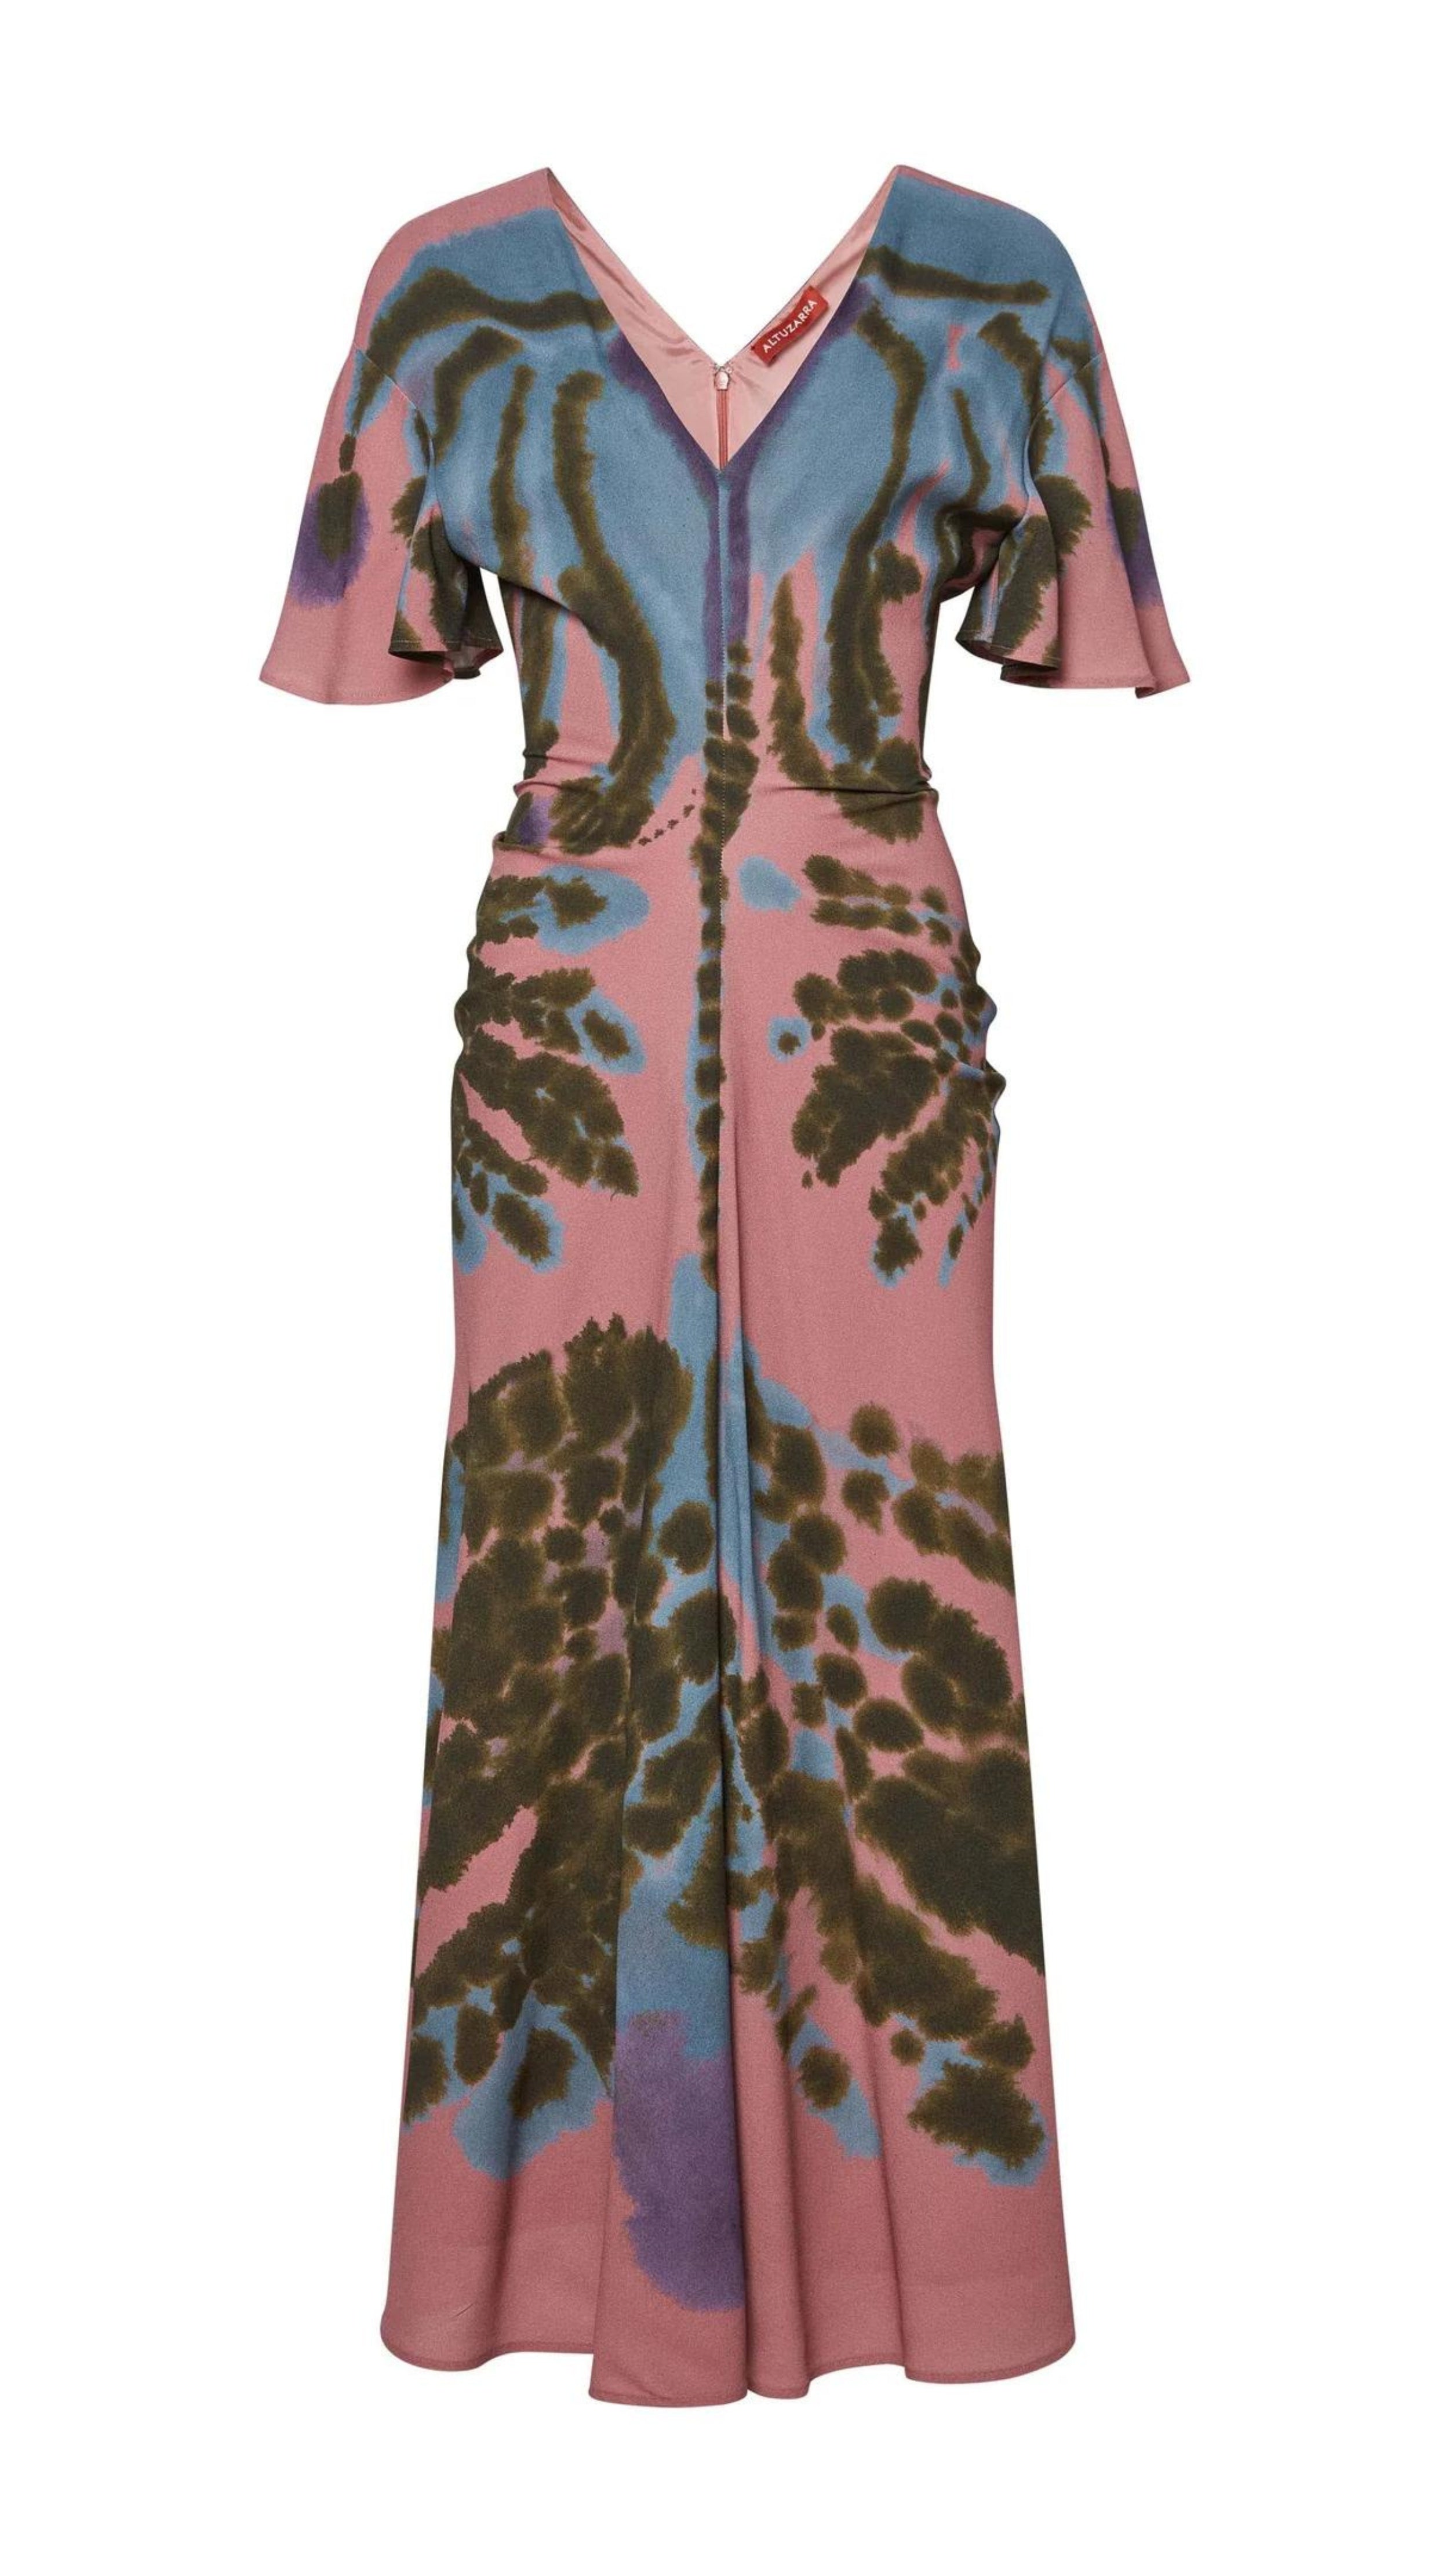 Altuzarra Pelopenese Dress. Rose pink, sky blue and green rorschach pattern midi dress. With a v neckline and soft draping half sleeves. Flowing skirt with waist line rouching. Product photo shown from front.